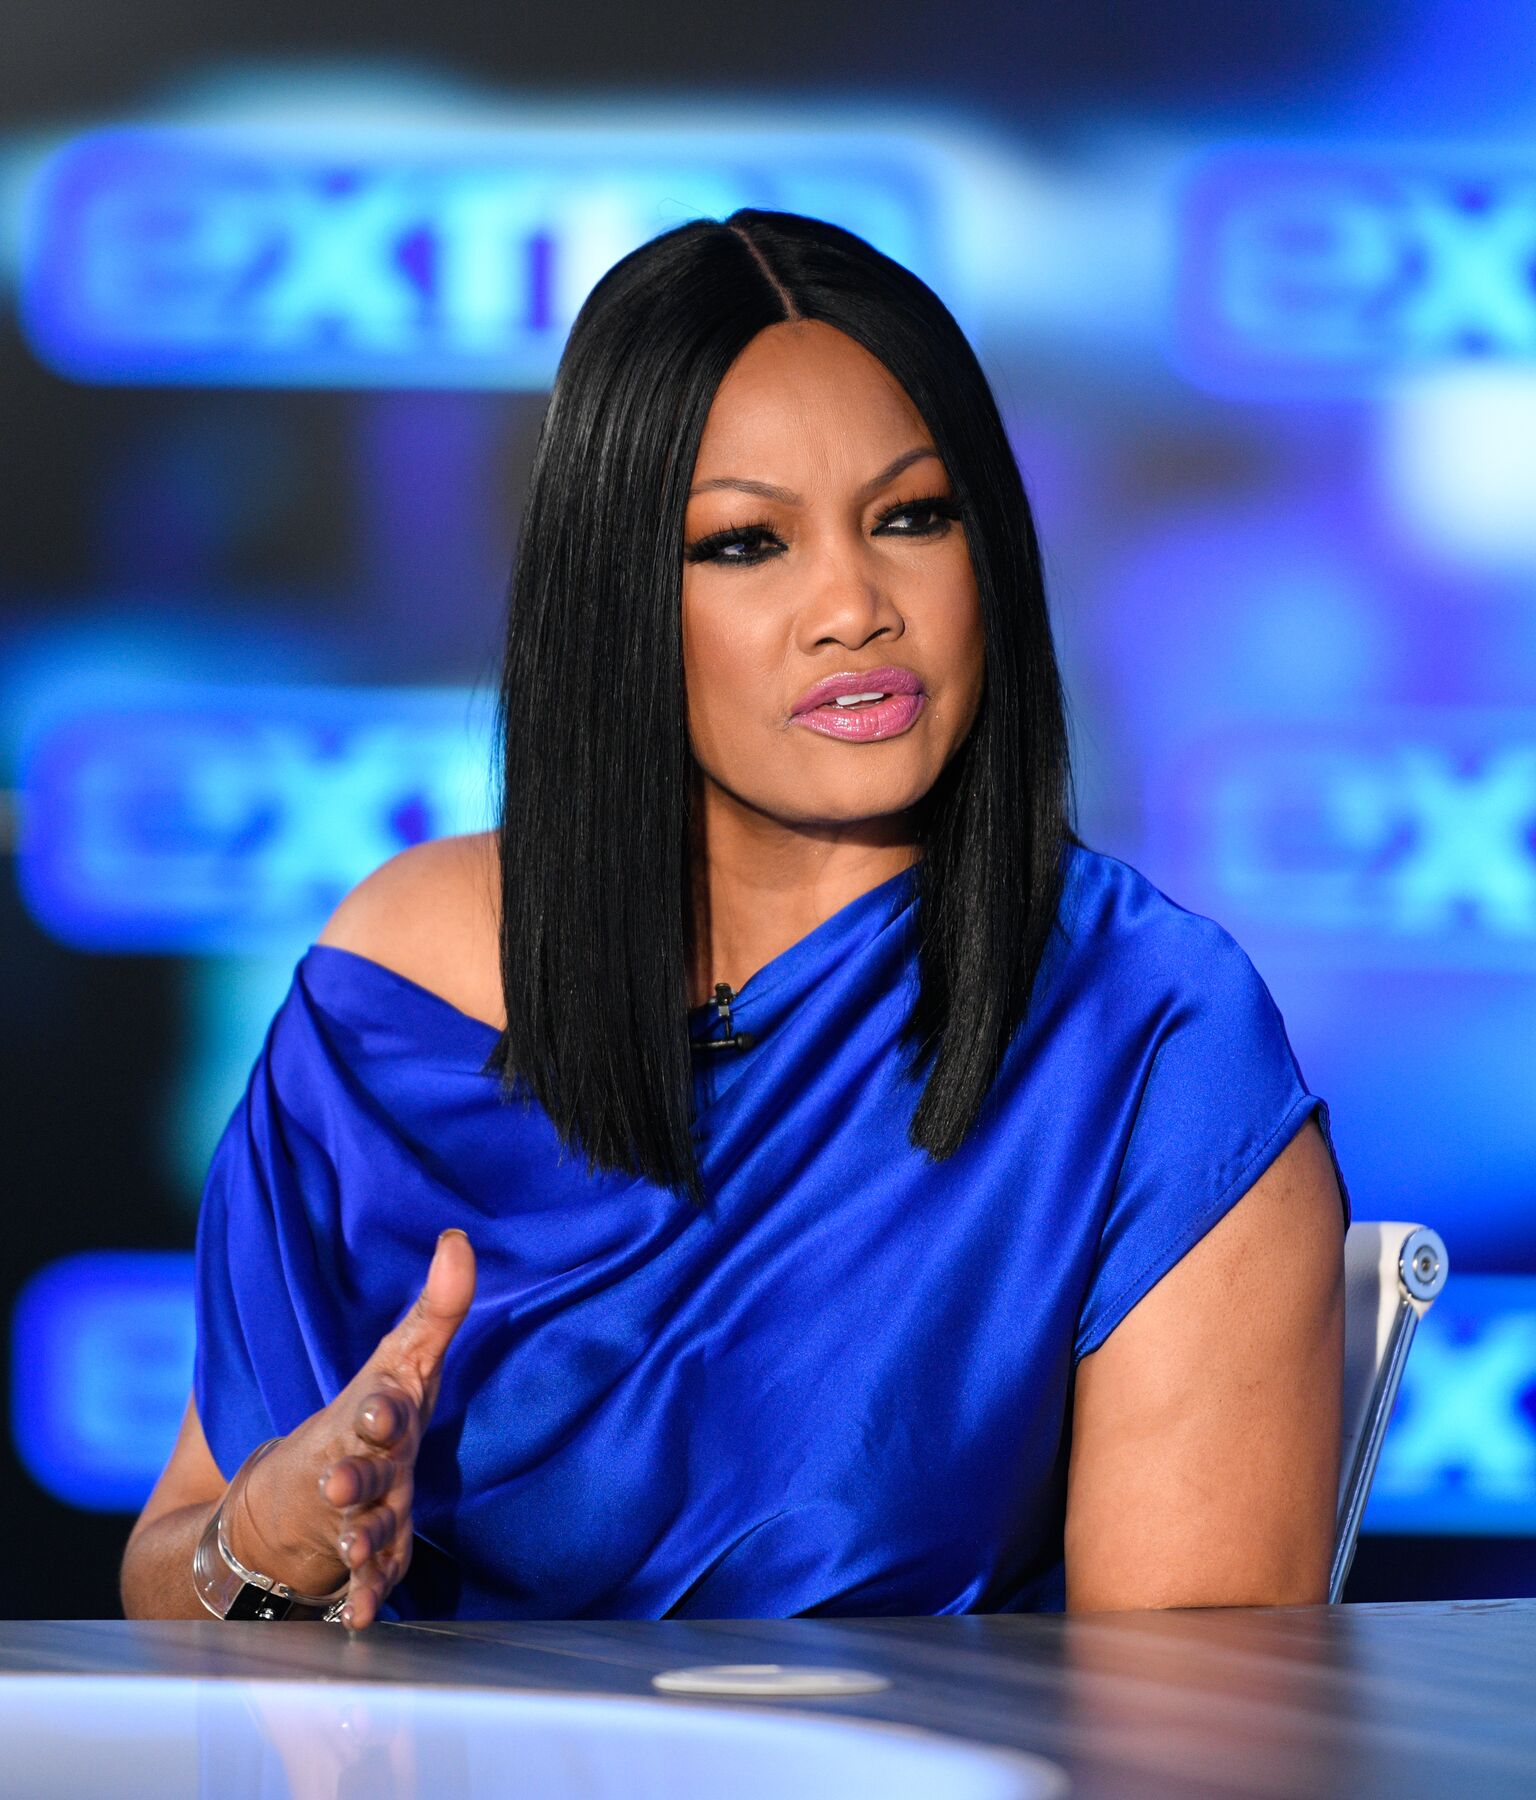 Garcelle Beauvais visits "Extra" at Burbank Studios on November 26, 2019 | Photo: Getty Images